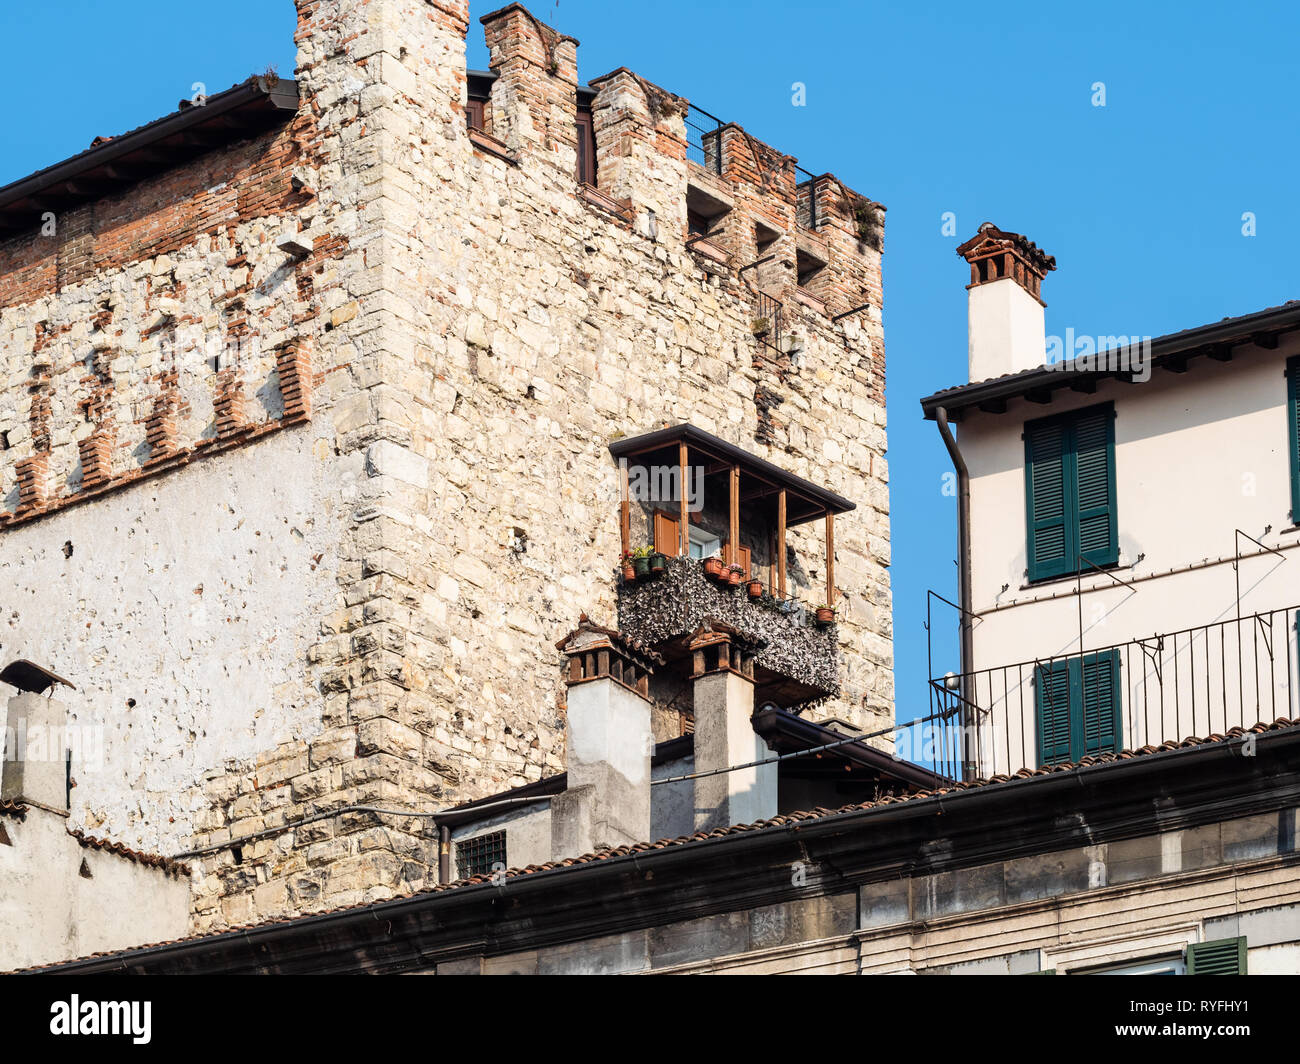 Travel to Italy - view of top of medieval tower Torre Bruciata from square Piazza Loggia in Brescia city, Lombardy Stock Photo